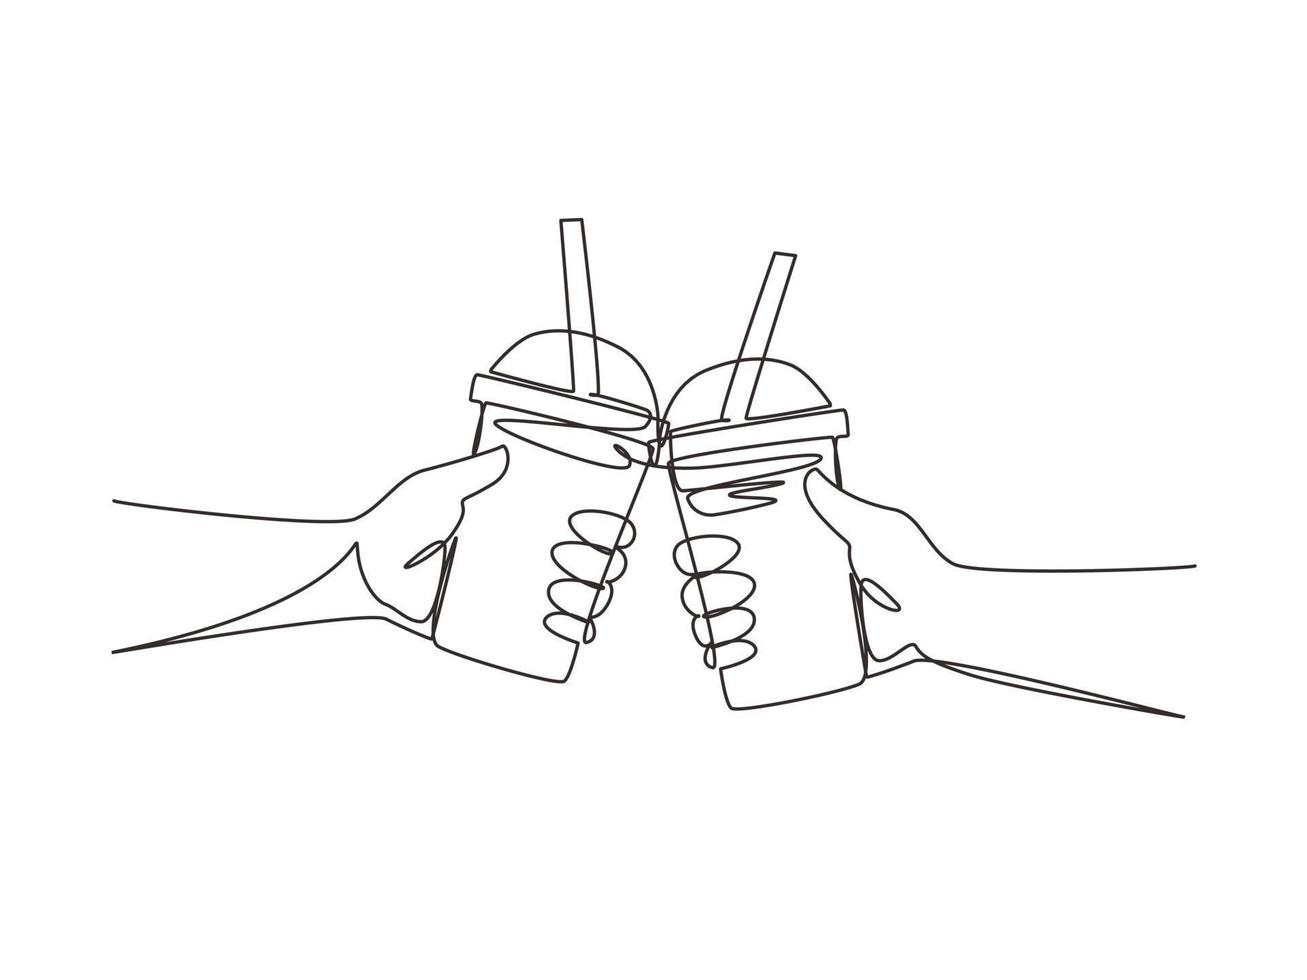 Single one line drawing two hands holding plastic cup bubble tea is toasting and clinking. Brown sugar flavor tapioca pearl bubble milk tea with glass straw. Continuous line draw design graphic vector